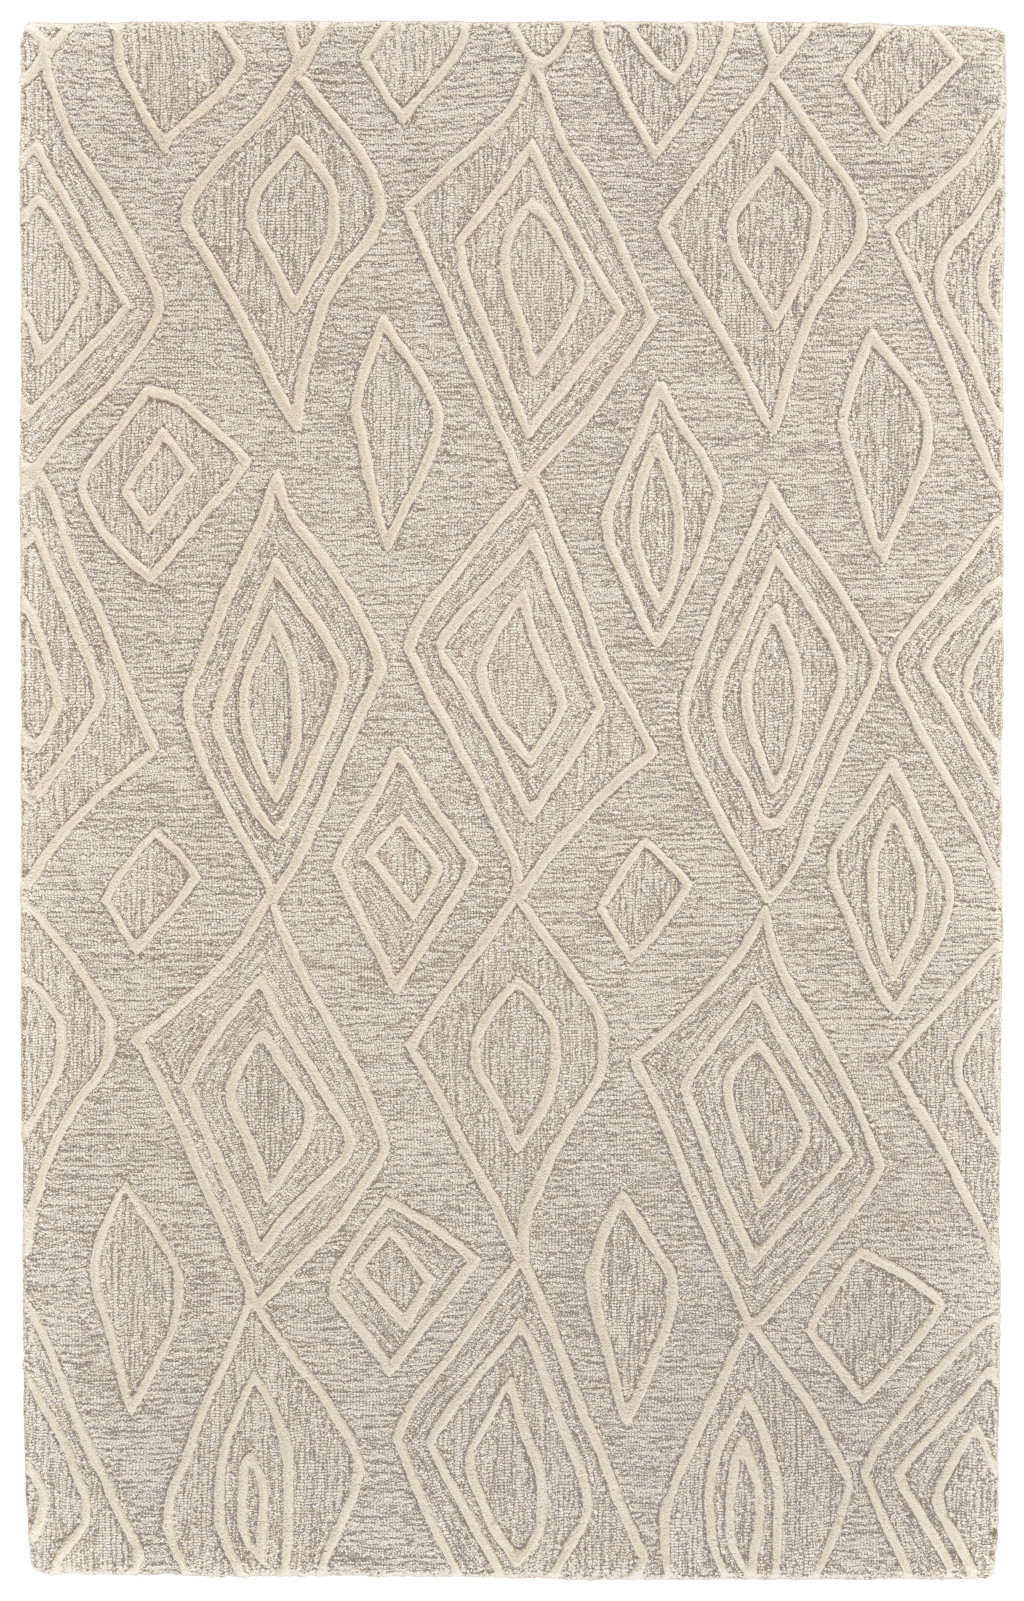 8' X 11' Tan And Ivory Wool Geometric Tufted Handmade Stain Resistant Area Rug-511870-1